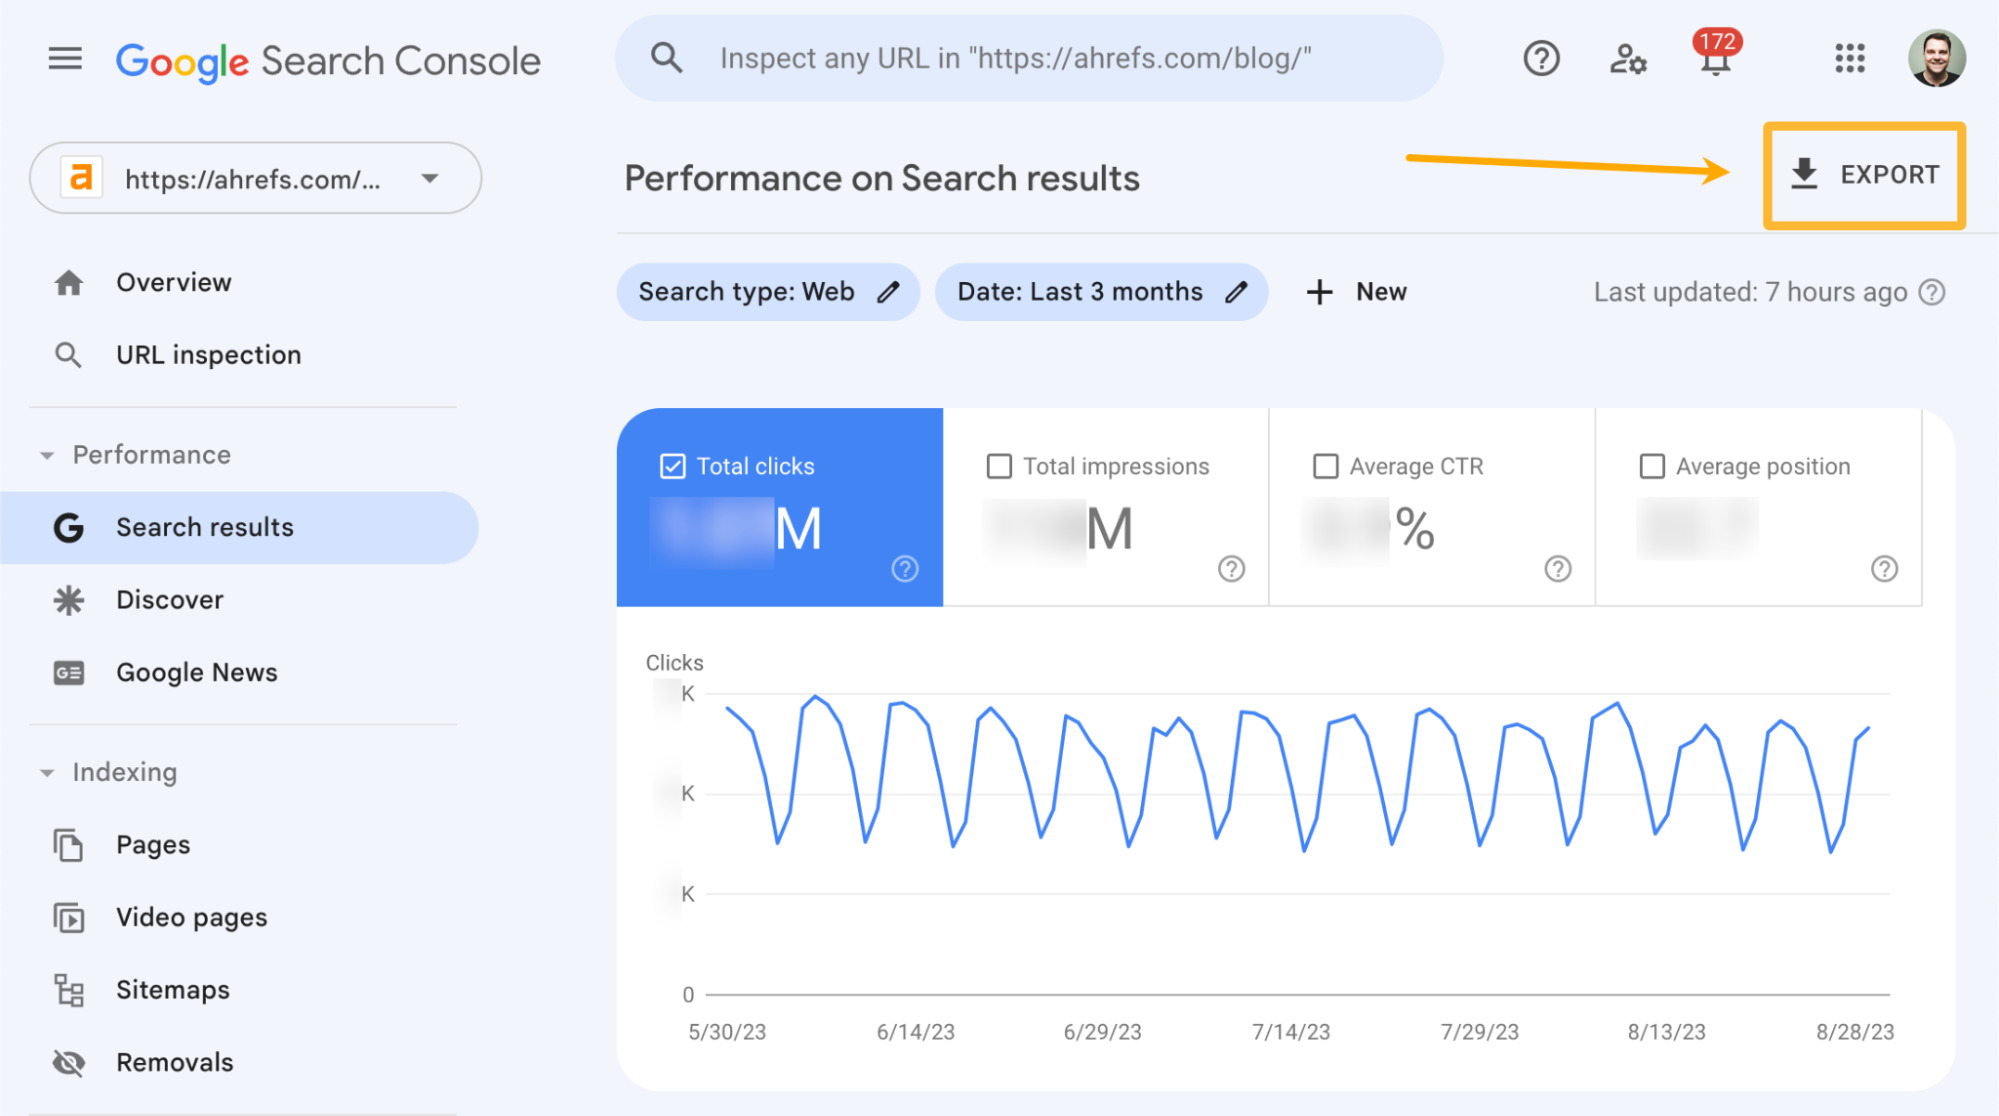 How to export traffic data from Google Search Console
